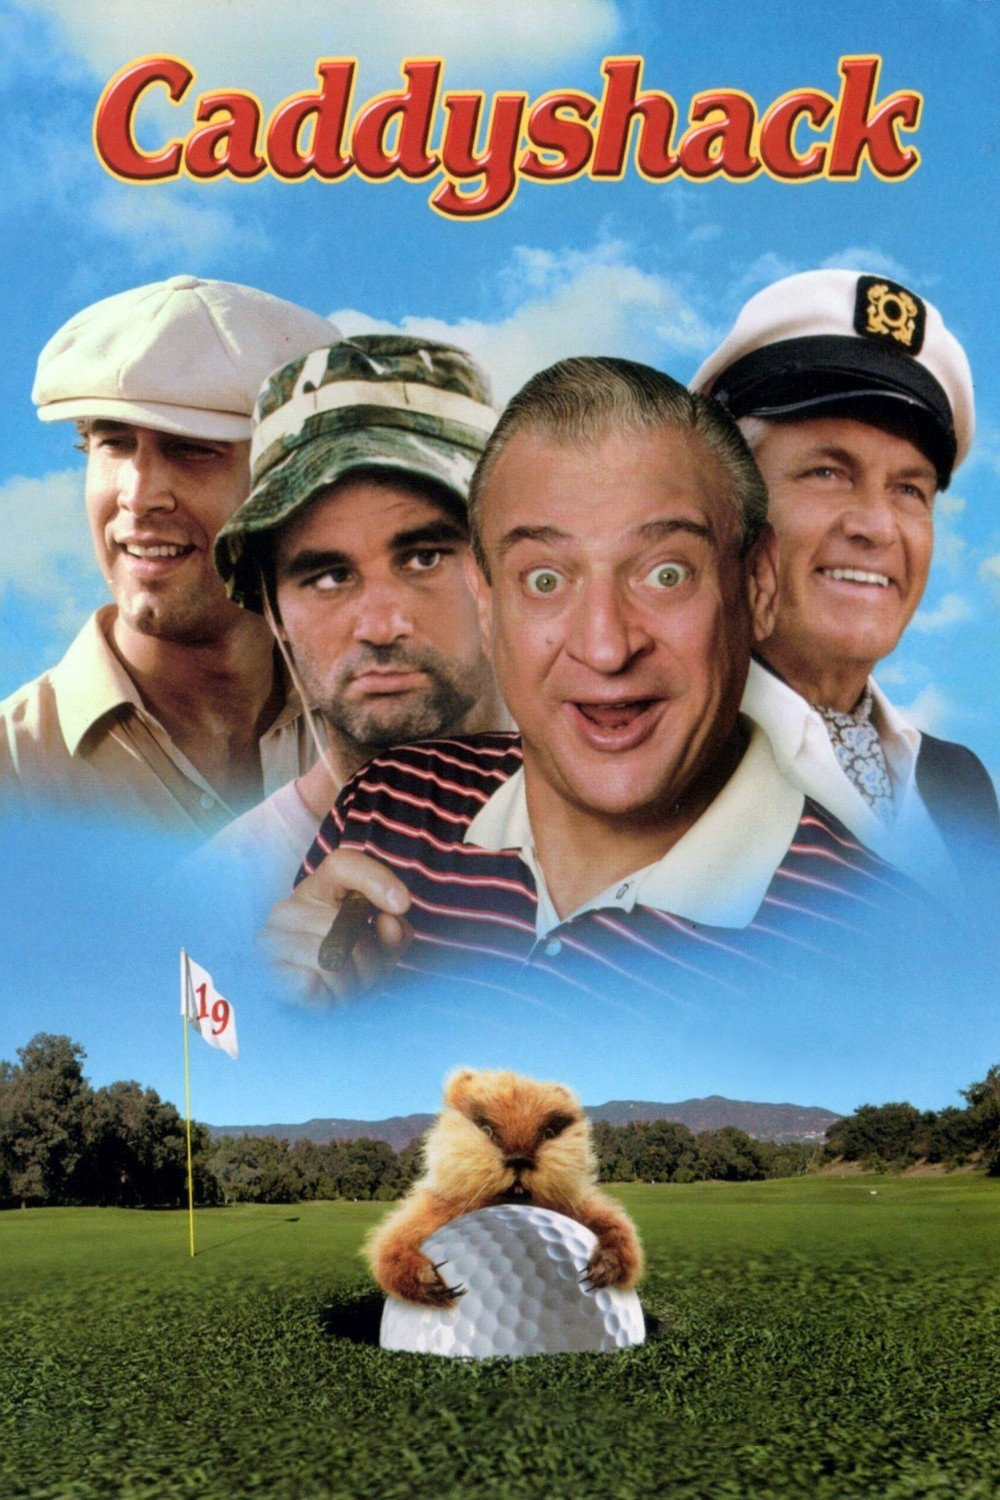 Poster for the movie "Caddyshack"